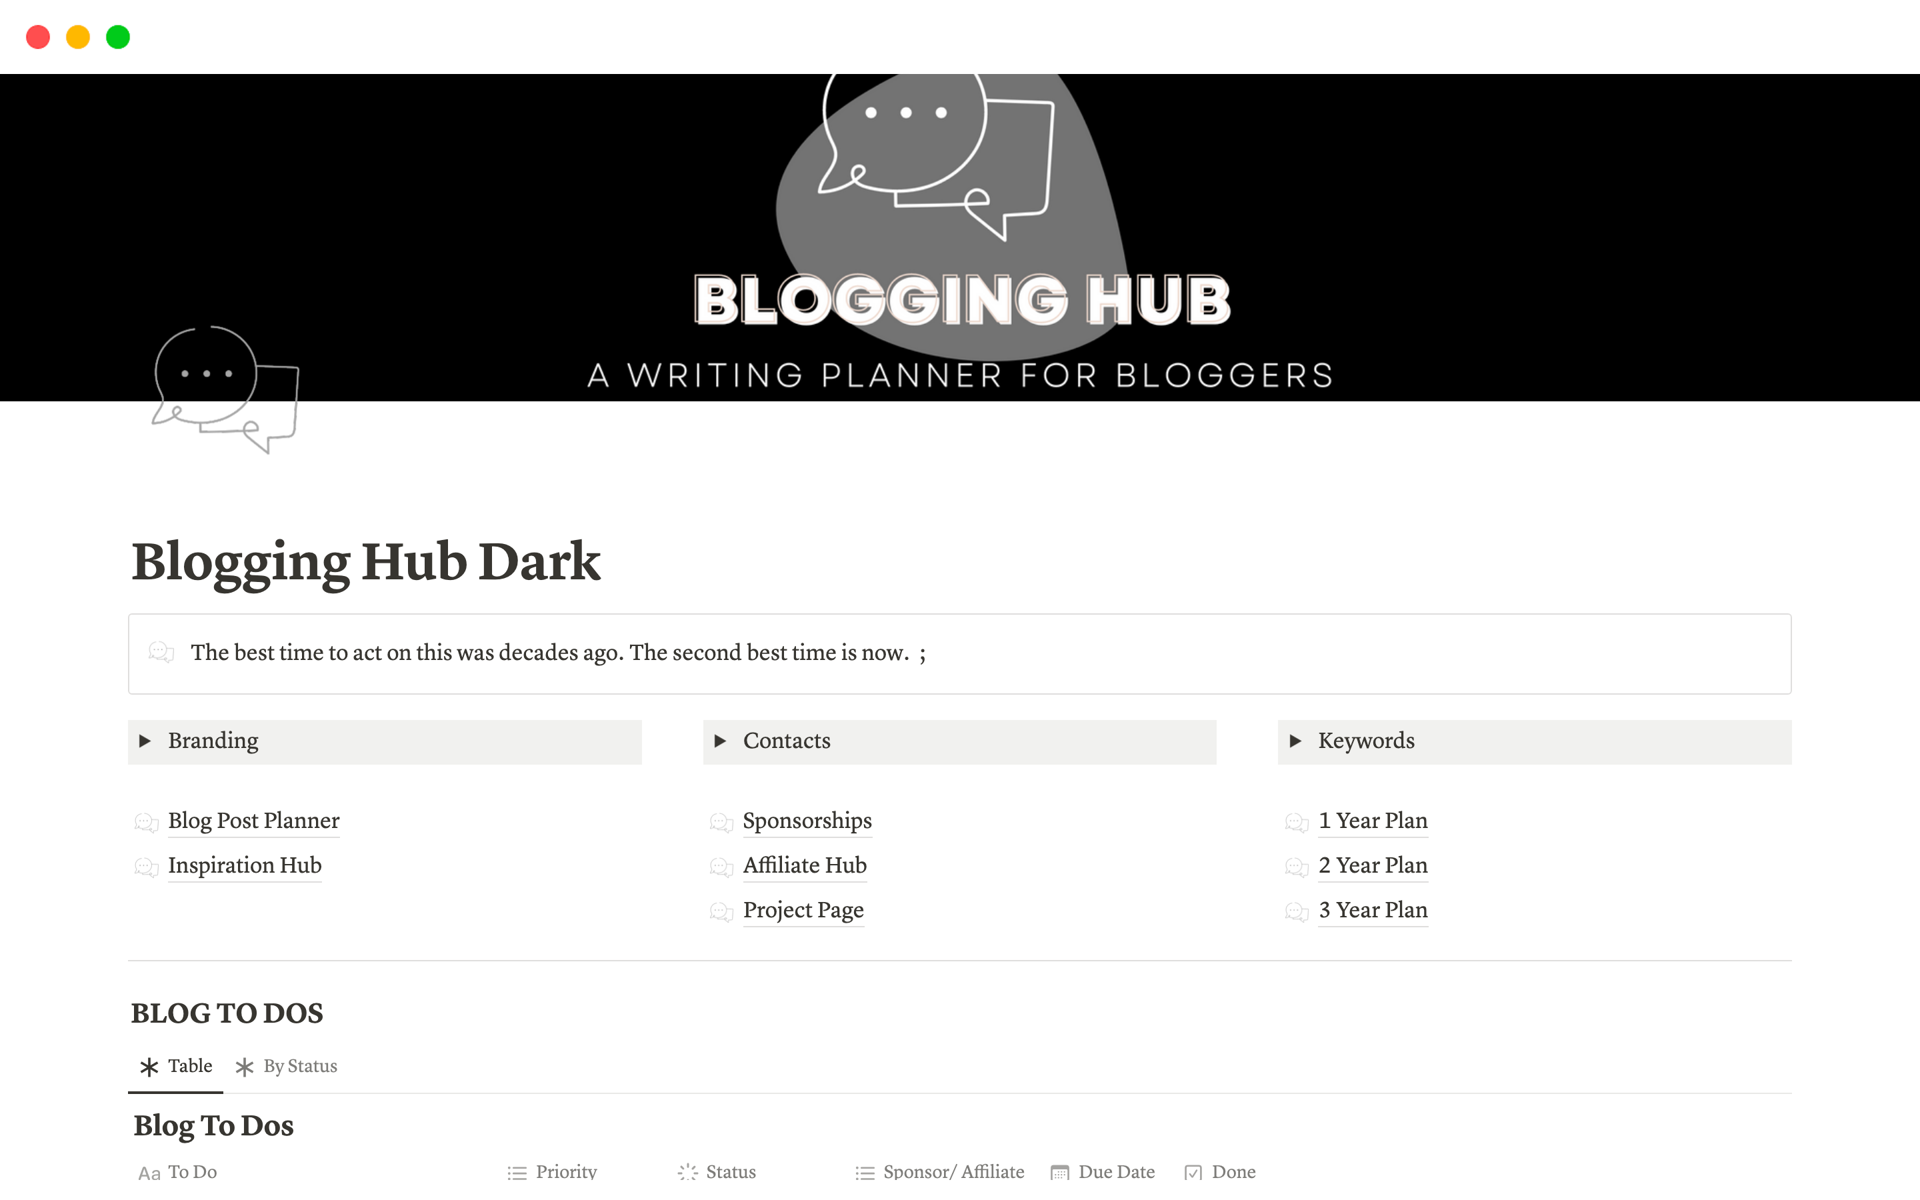 Plan your blog in Notion with this blogging hub and planner including tools to organize affiliates, partners, sponsorships, posts, inspiration and more.